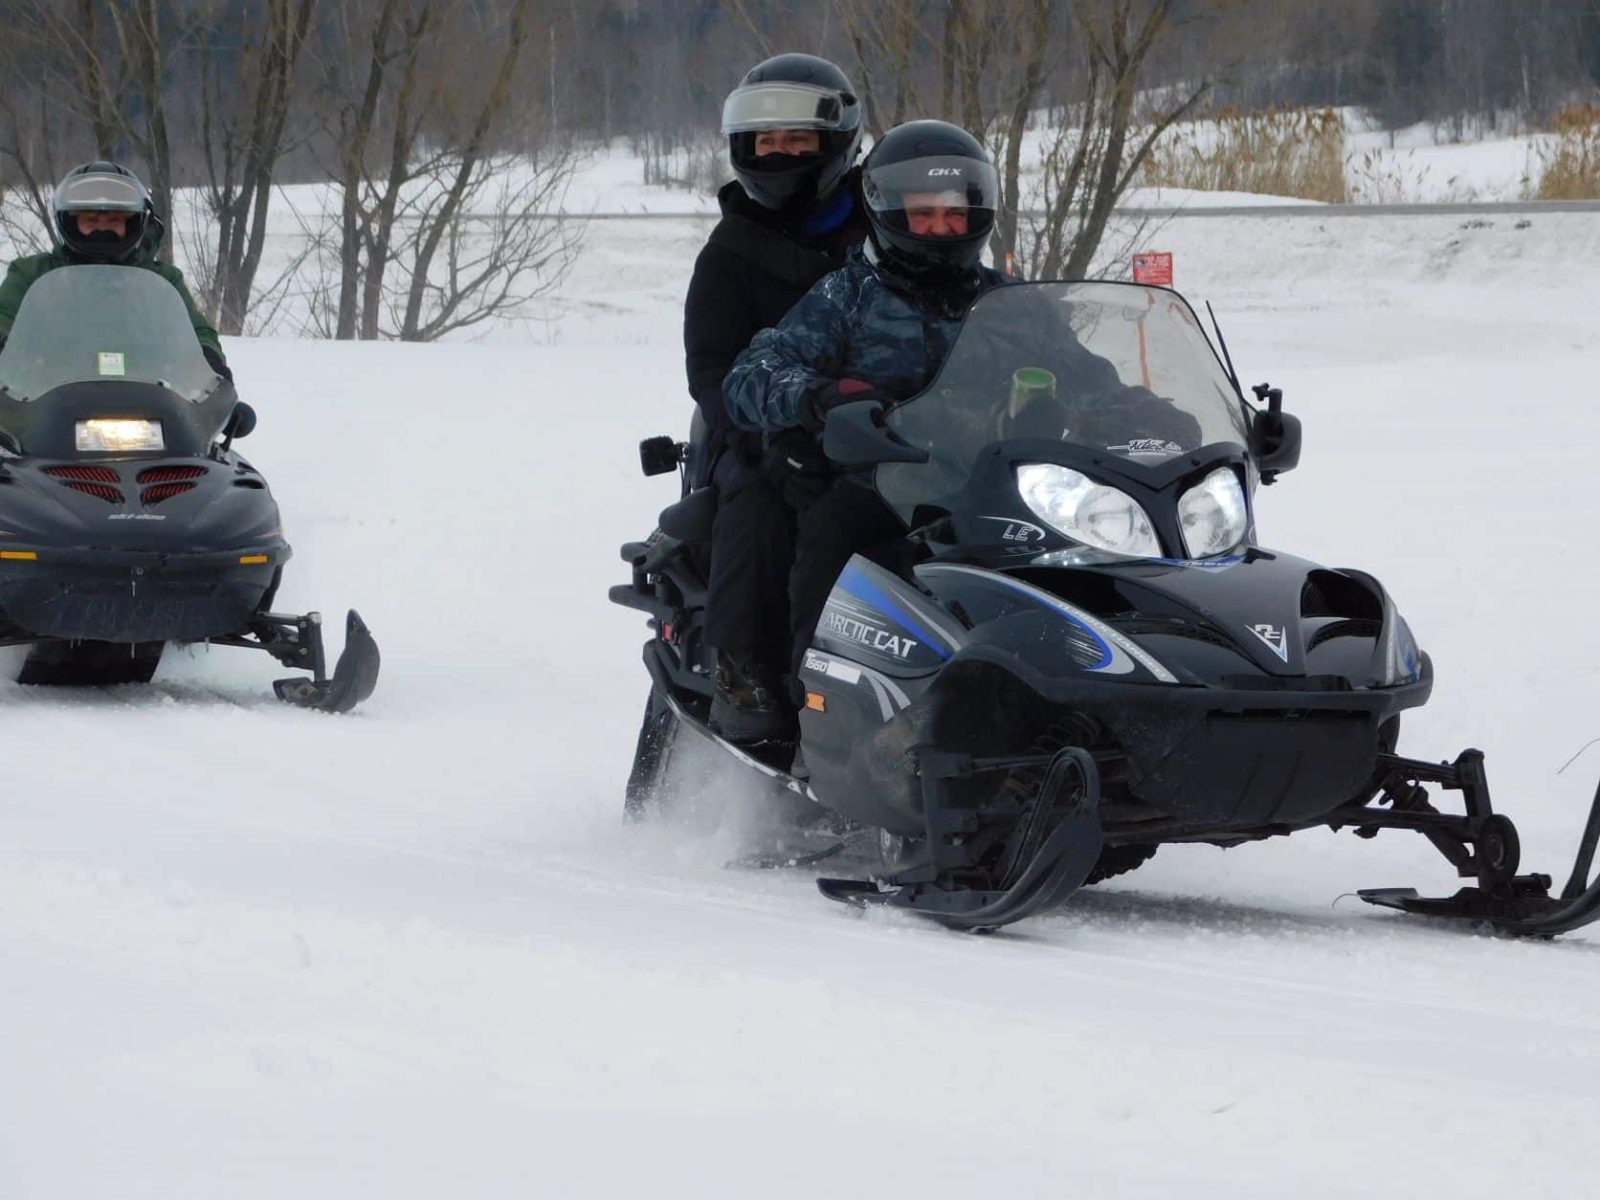 Snowmobilers support autism programs